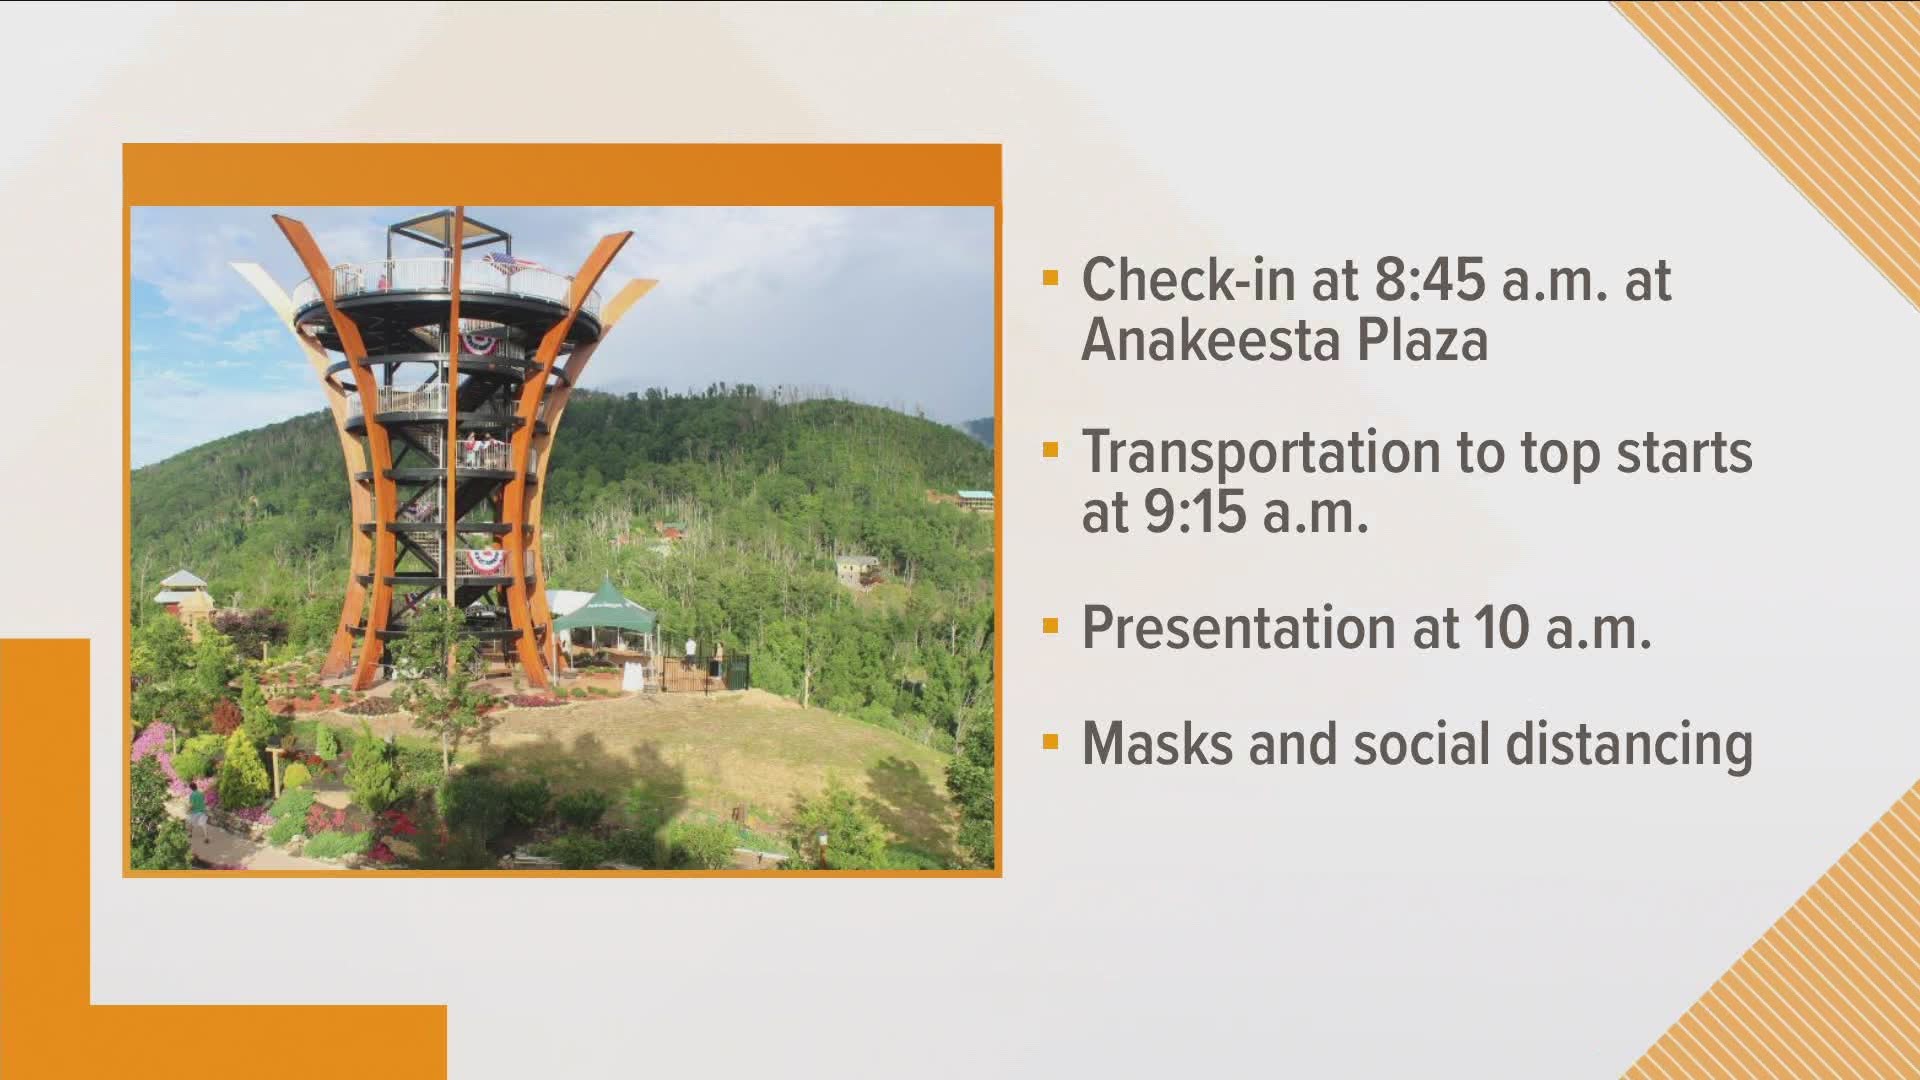 Officials called it the "crowning jewel" atop Anakeesta, which is part of its $6.5 million expansion.